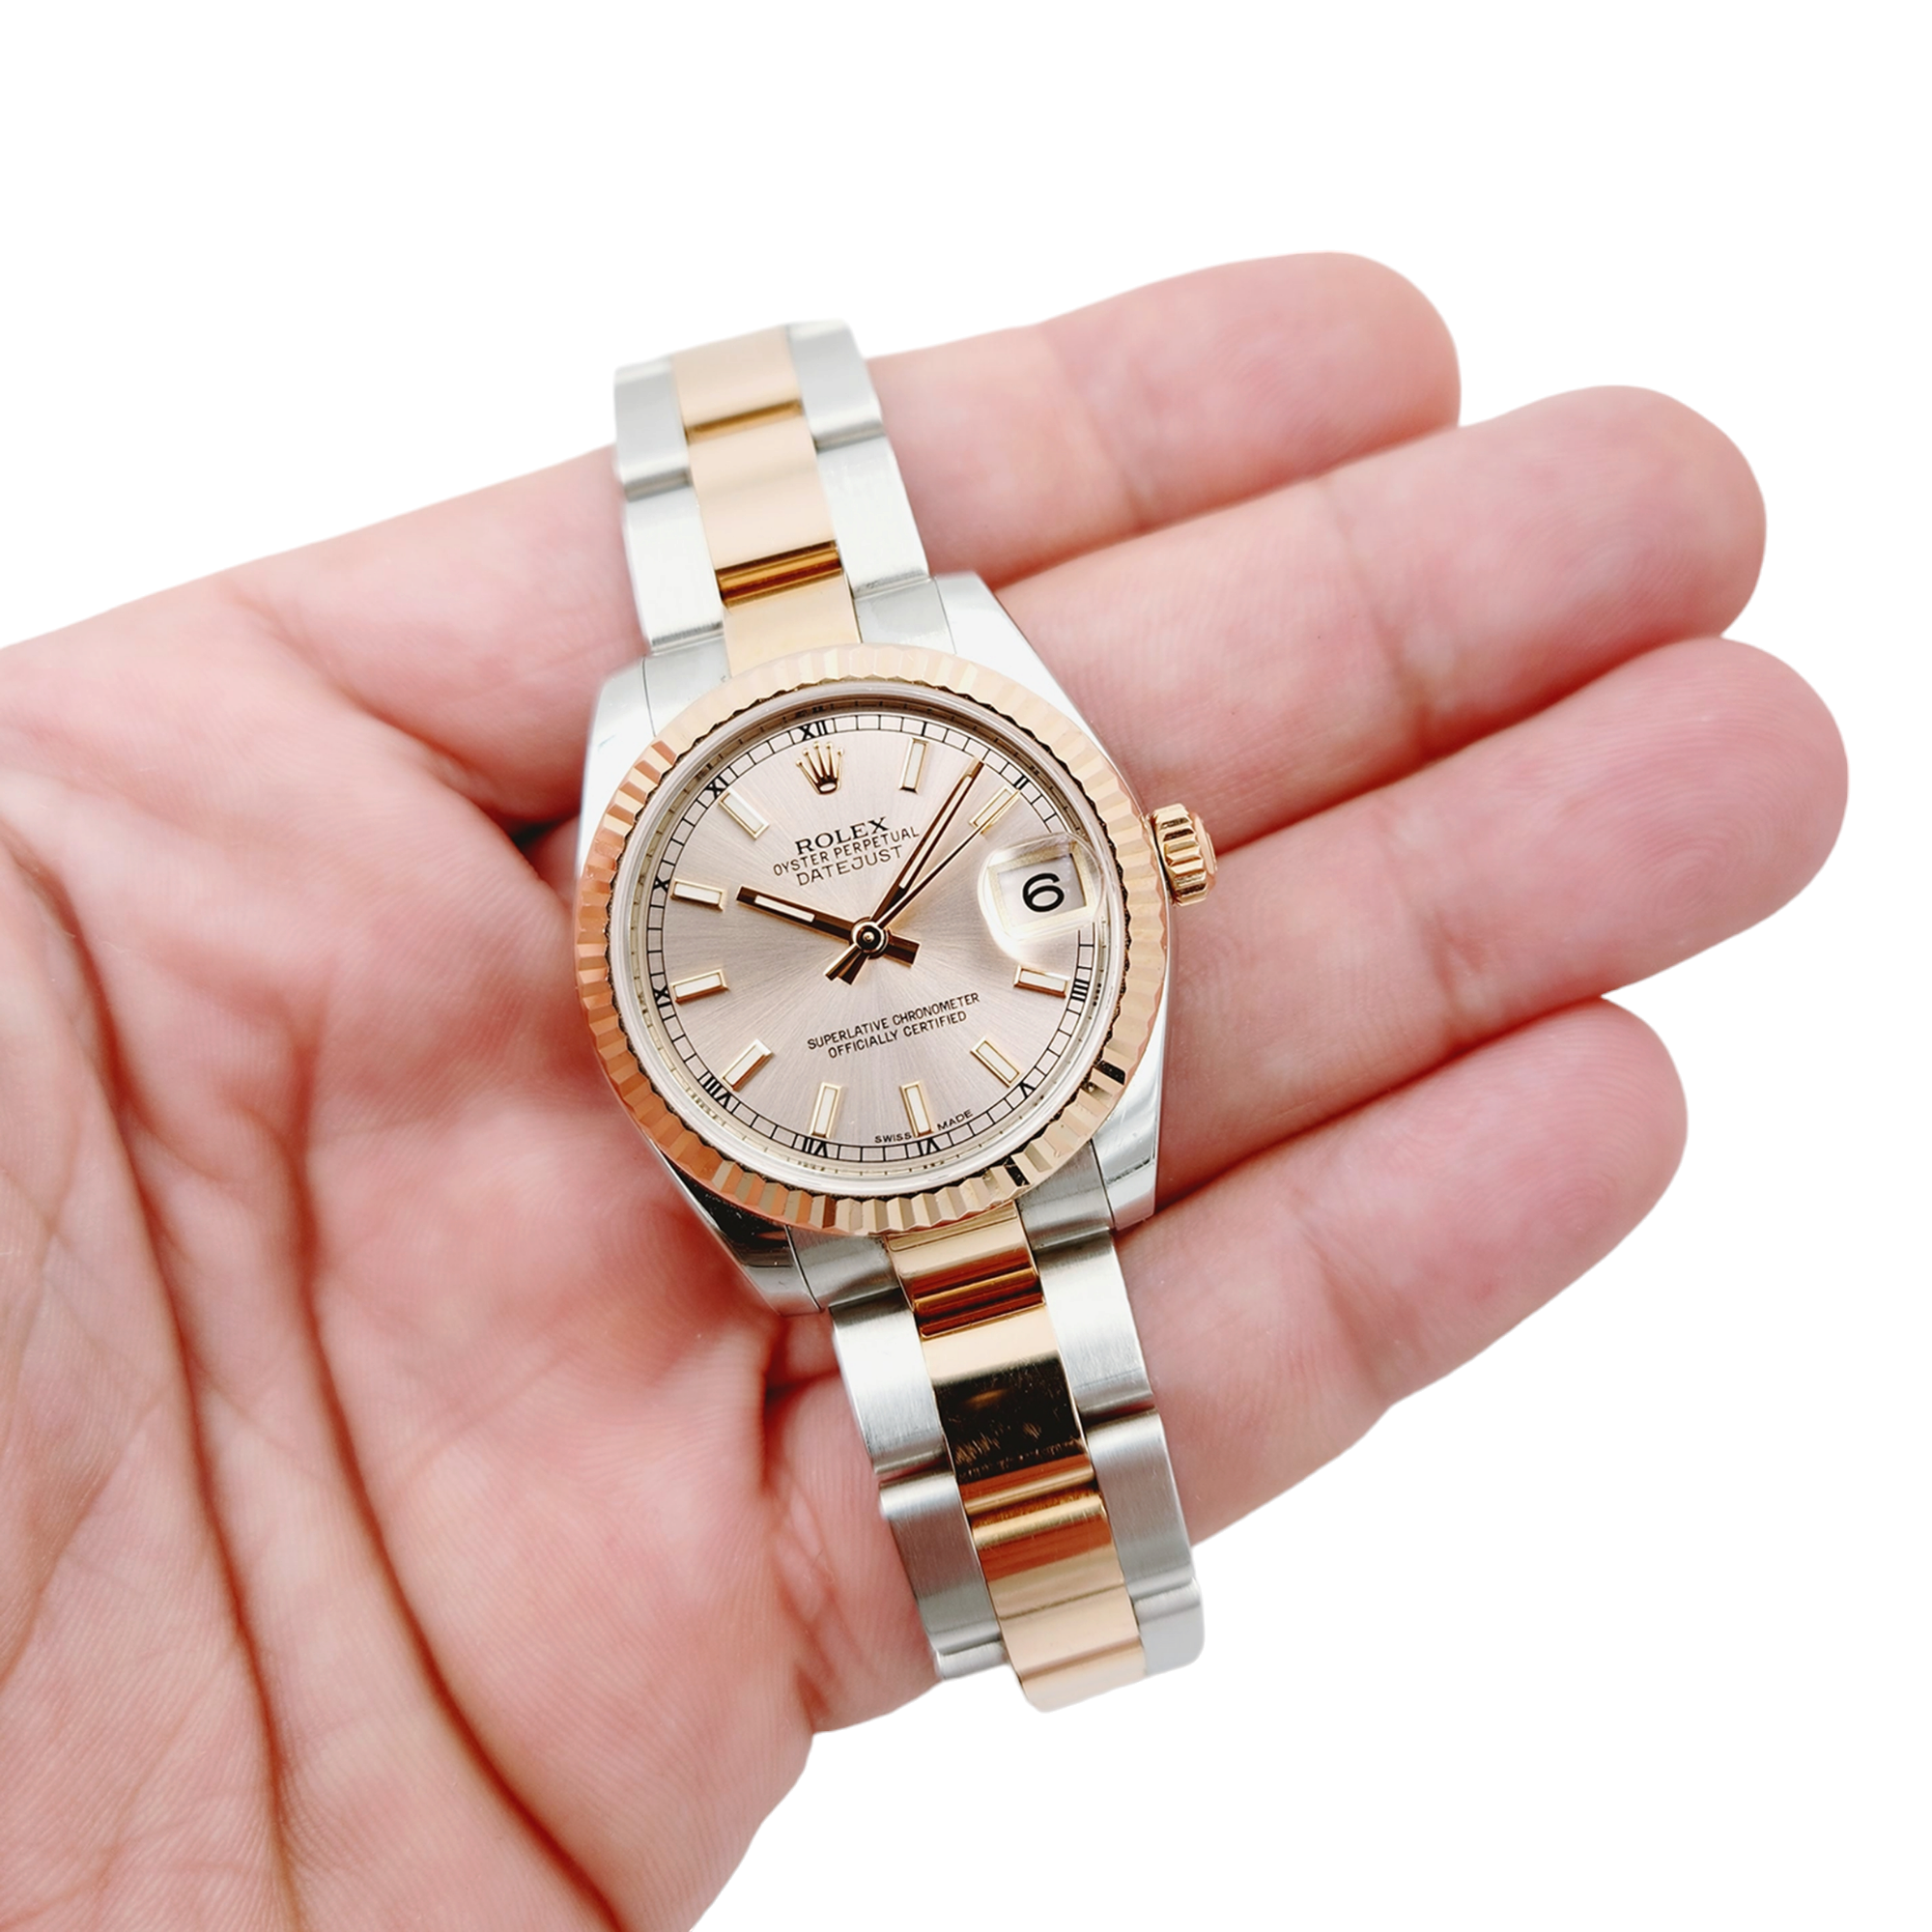 Ladies Rolex 31mm Midsize DateJust Two Tone 18K Rose Gold / Stainless Steel Wristwatch w/ Pink Dial & Fluted Bezel. (Pre-Owned 178271)